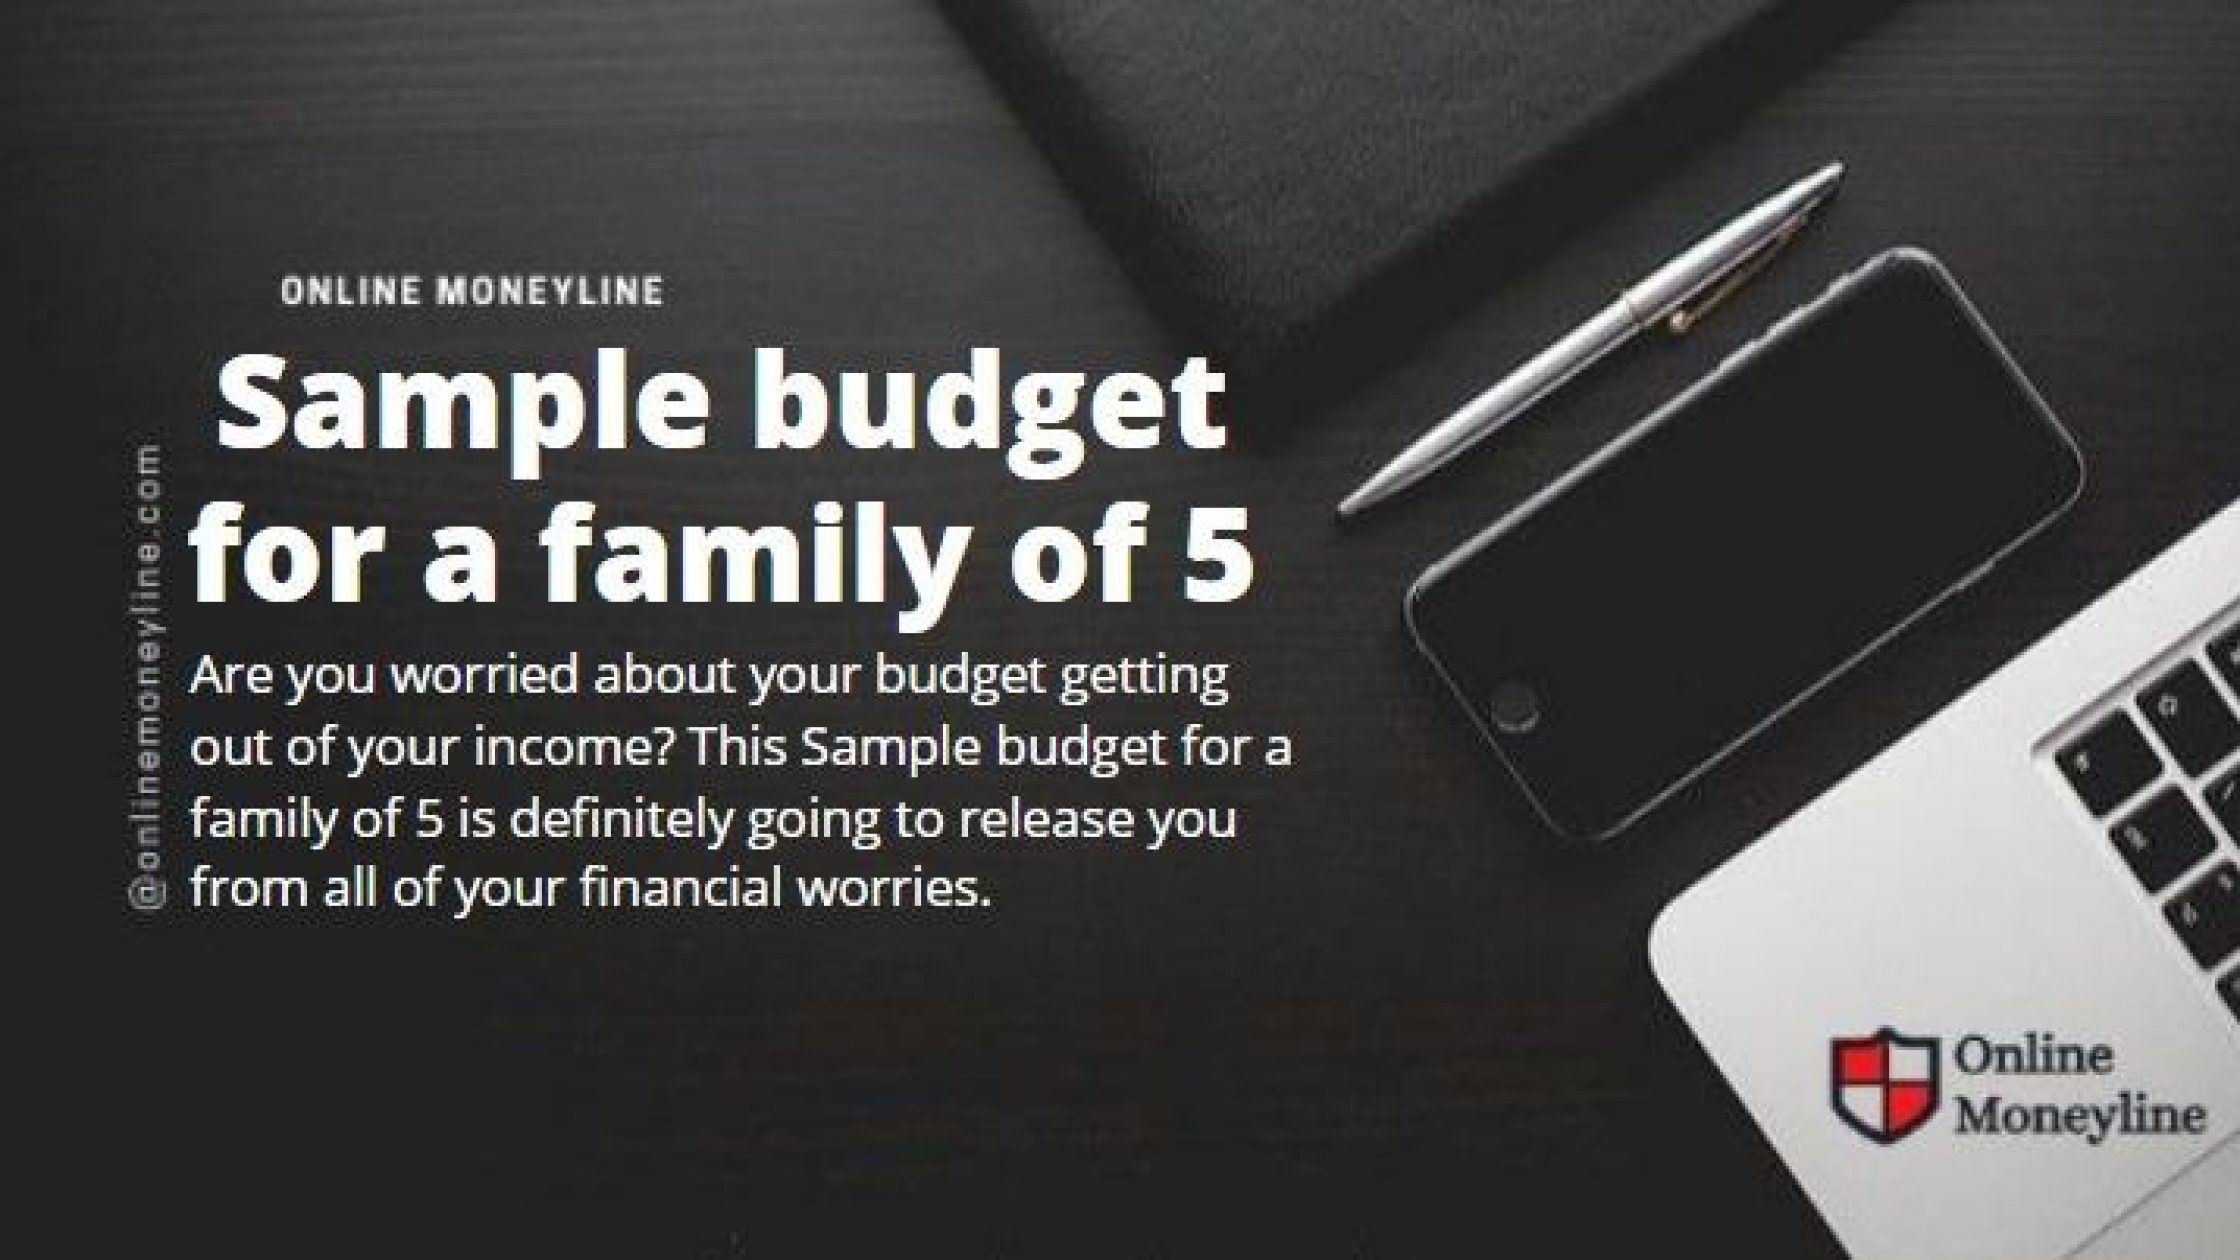 Sample budget for a family of 5